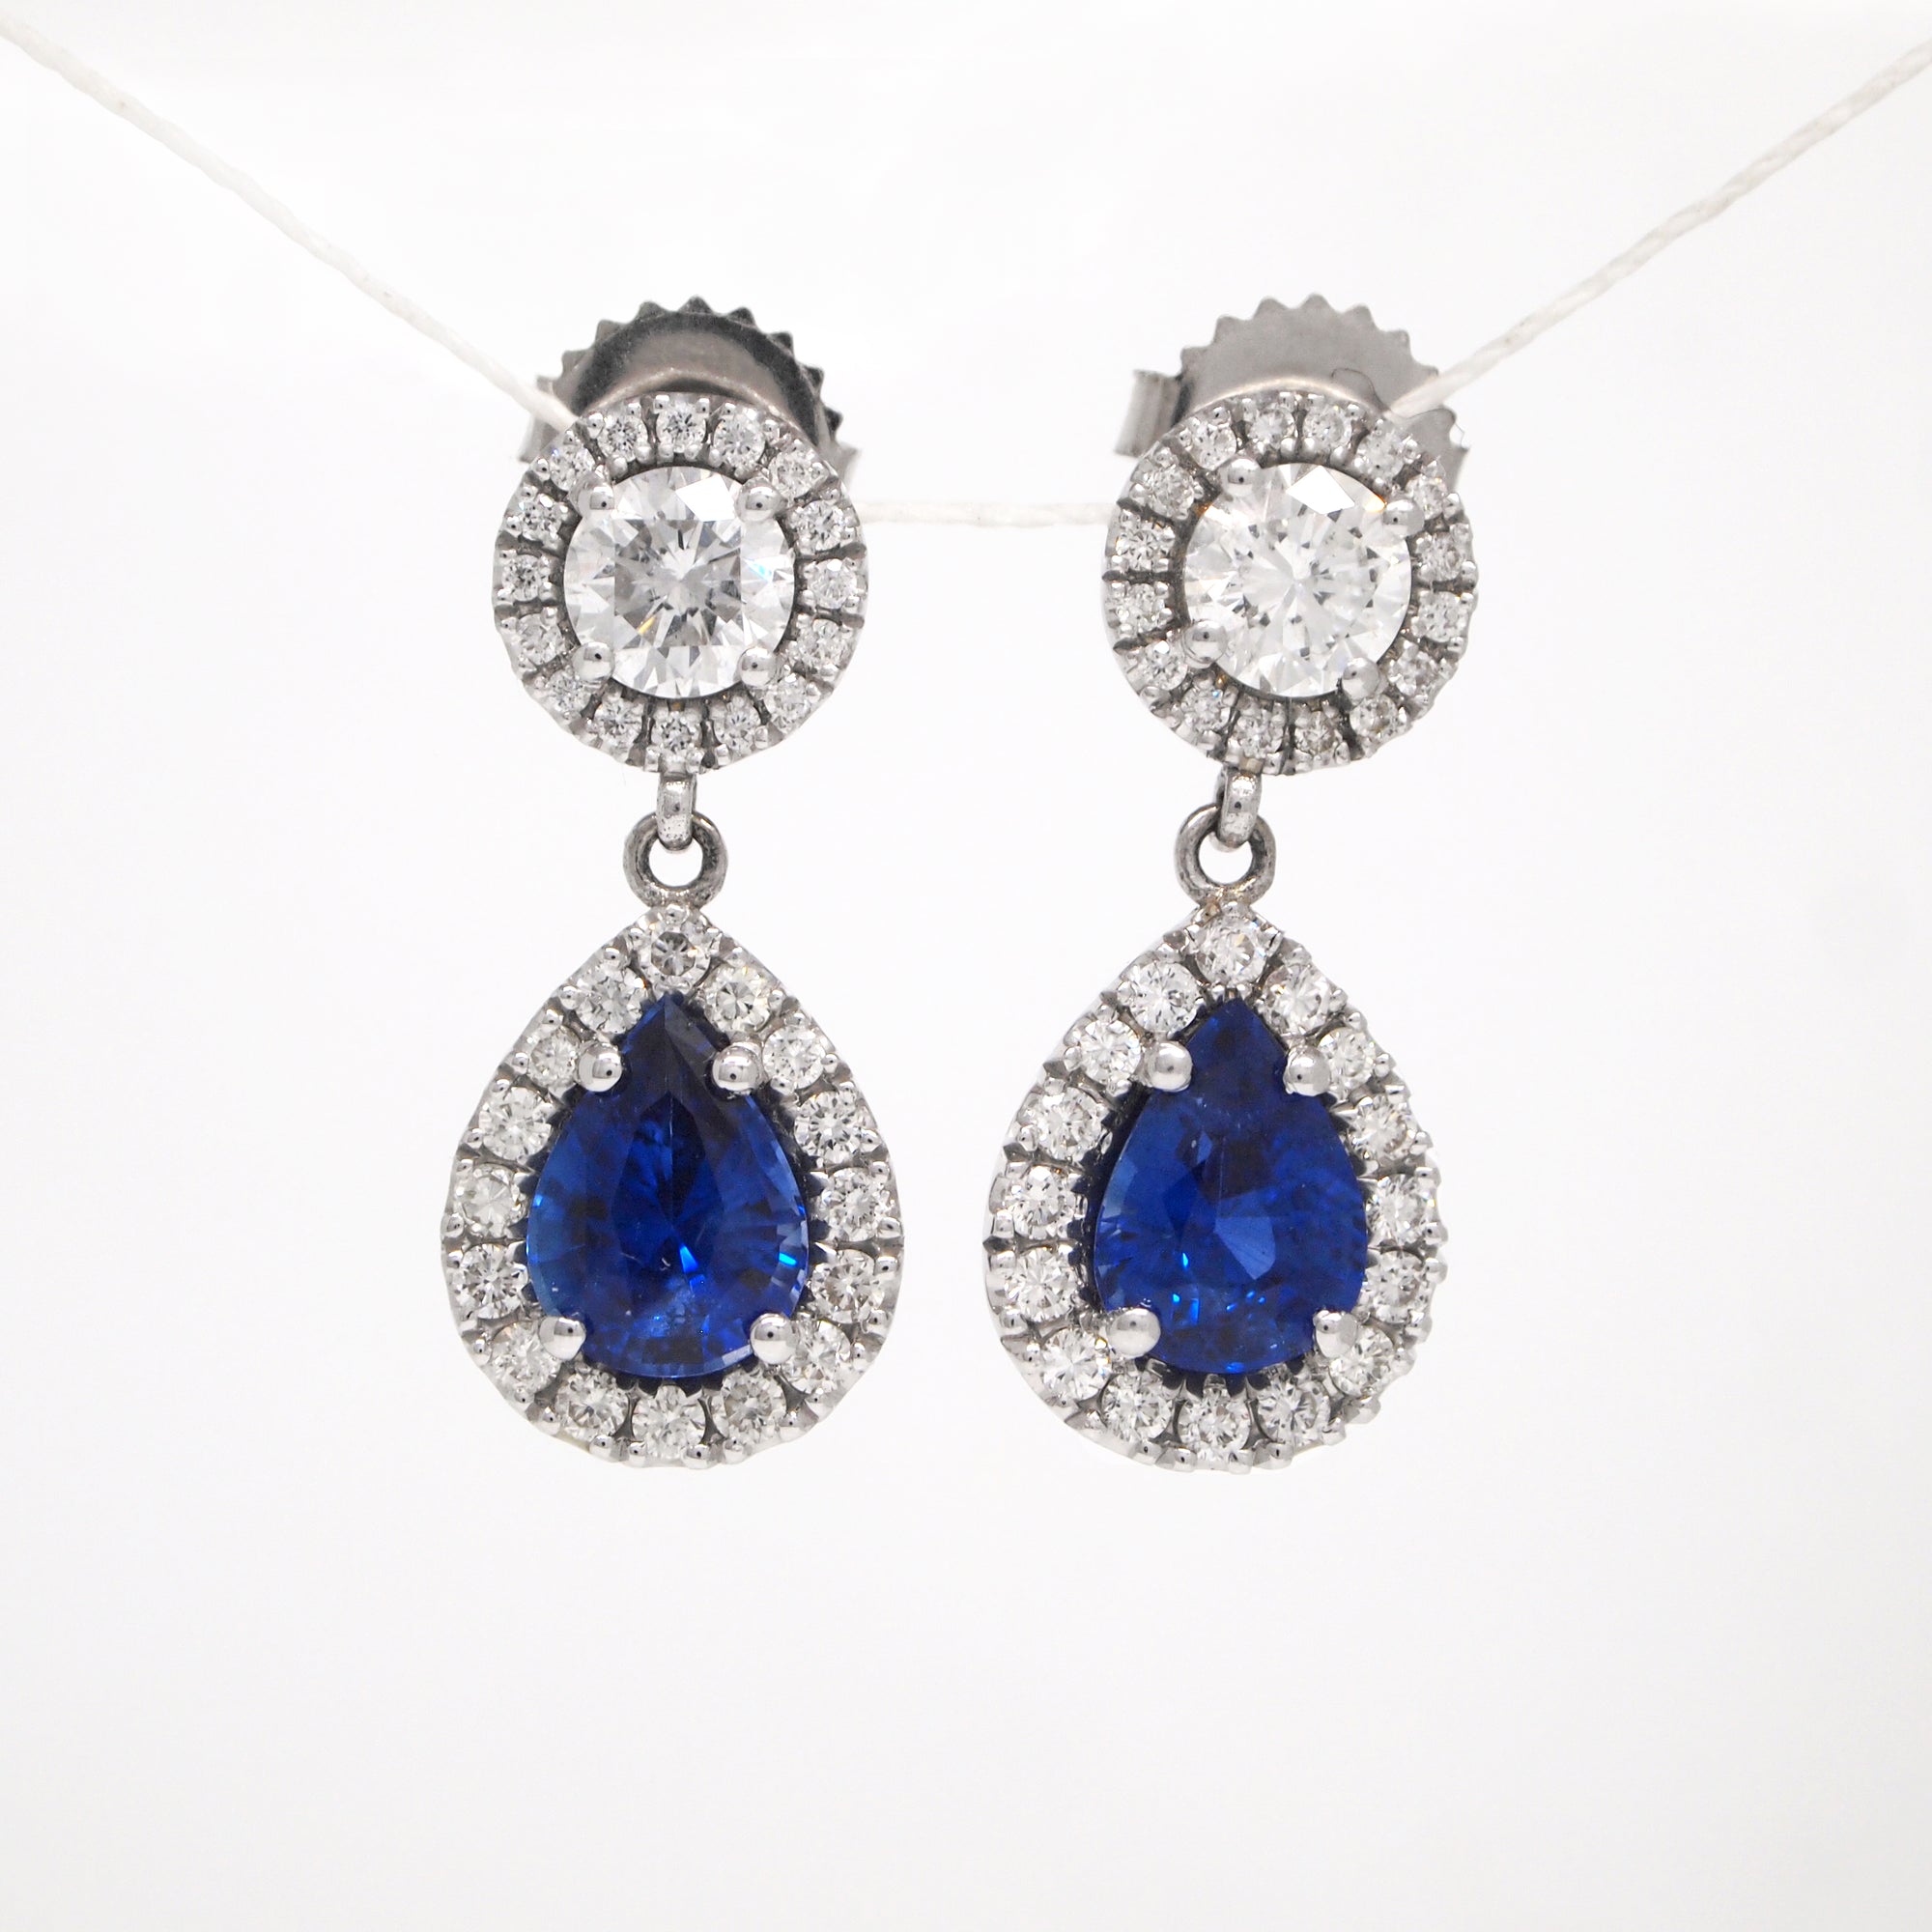 14K White Gold Pear Shaped Sapphire and Diamond Earrings